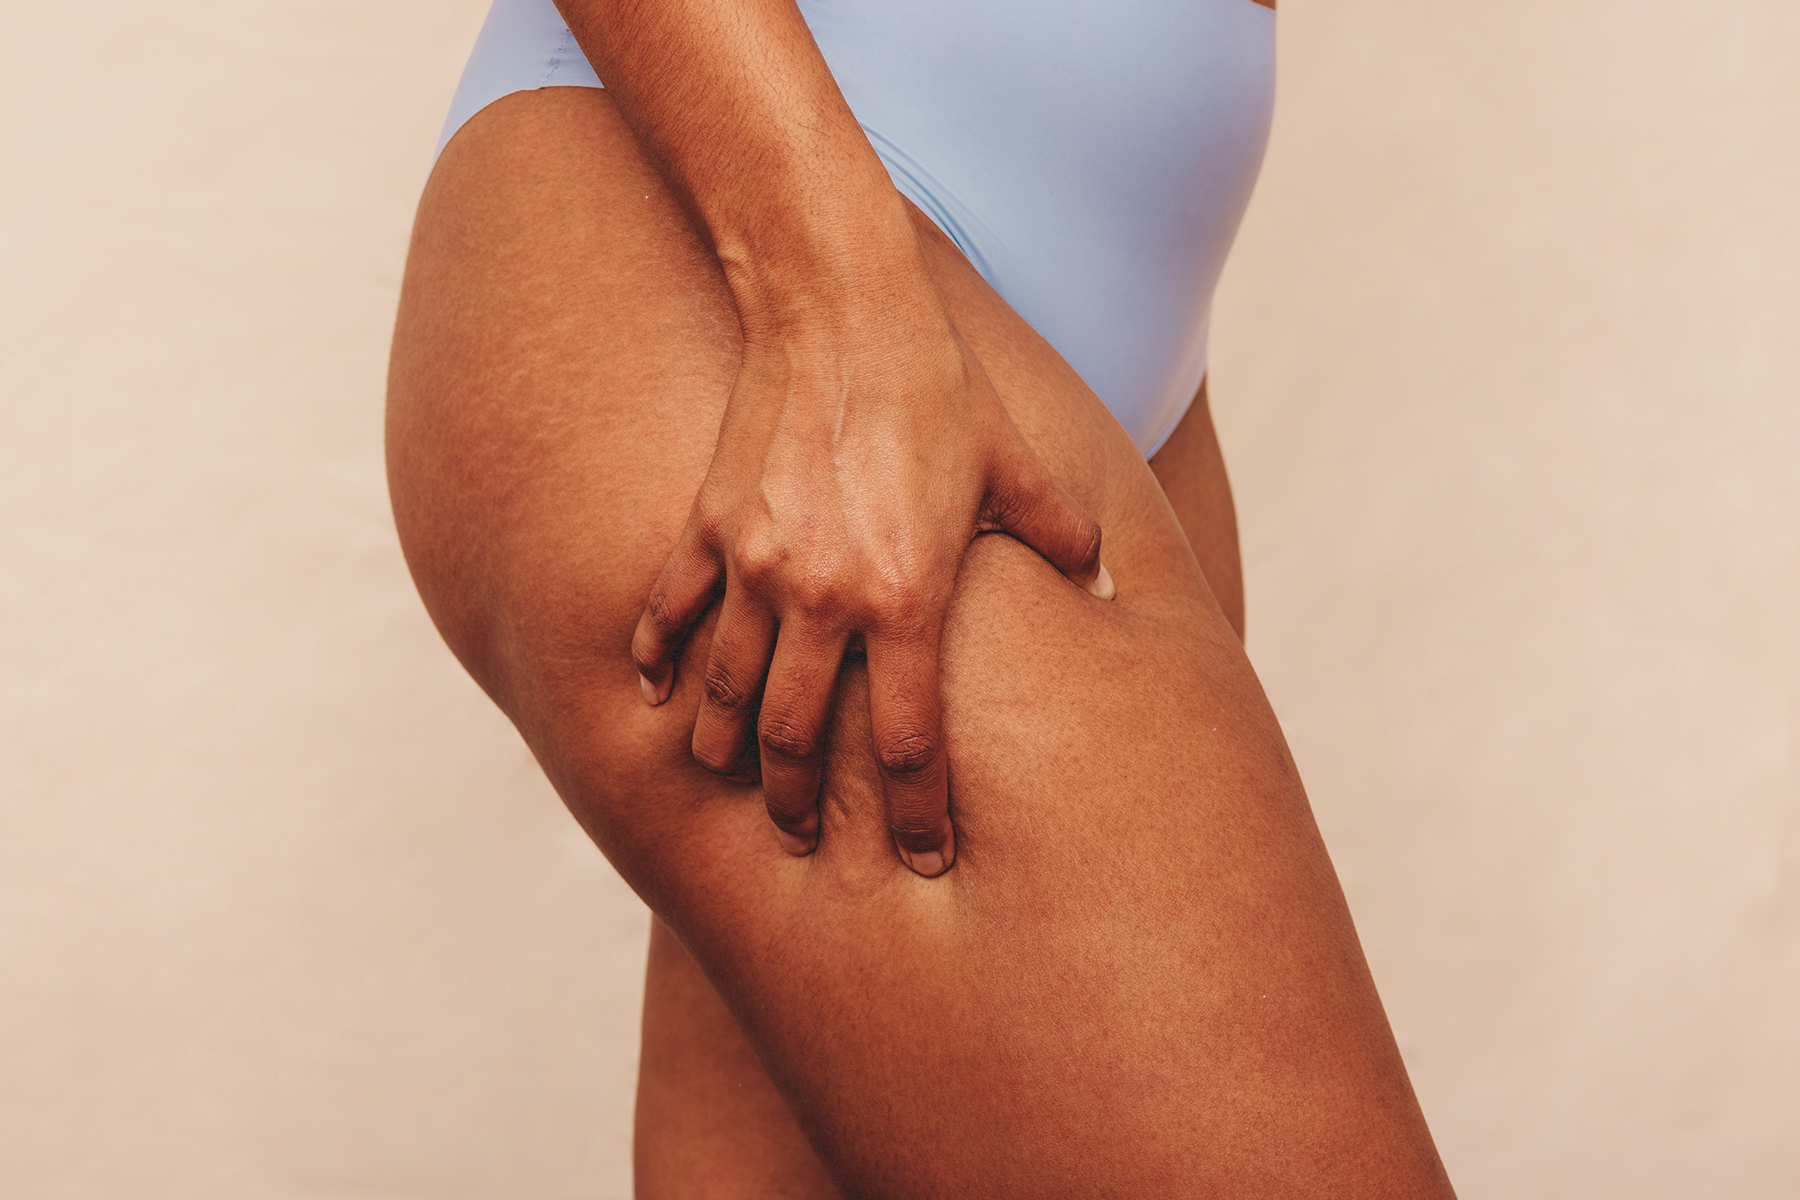 Almost everyone has cellulite, and that's okay